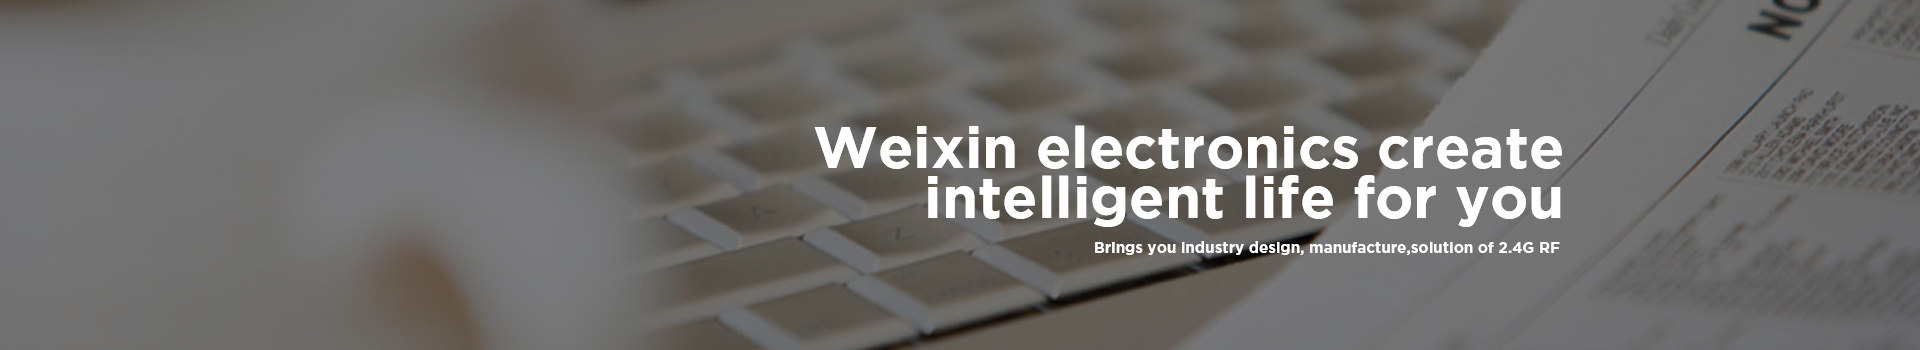 Weixin electronics create intelligent life for you